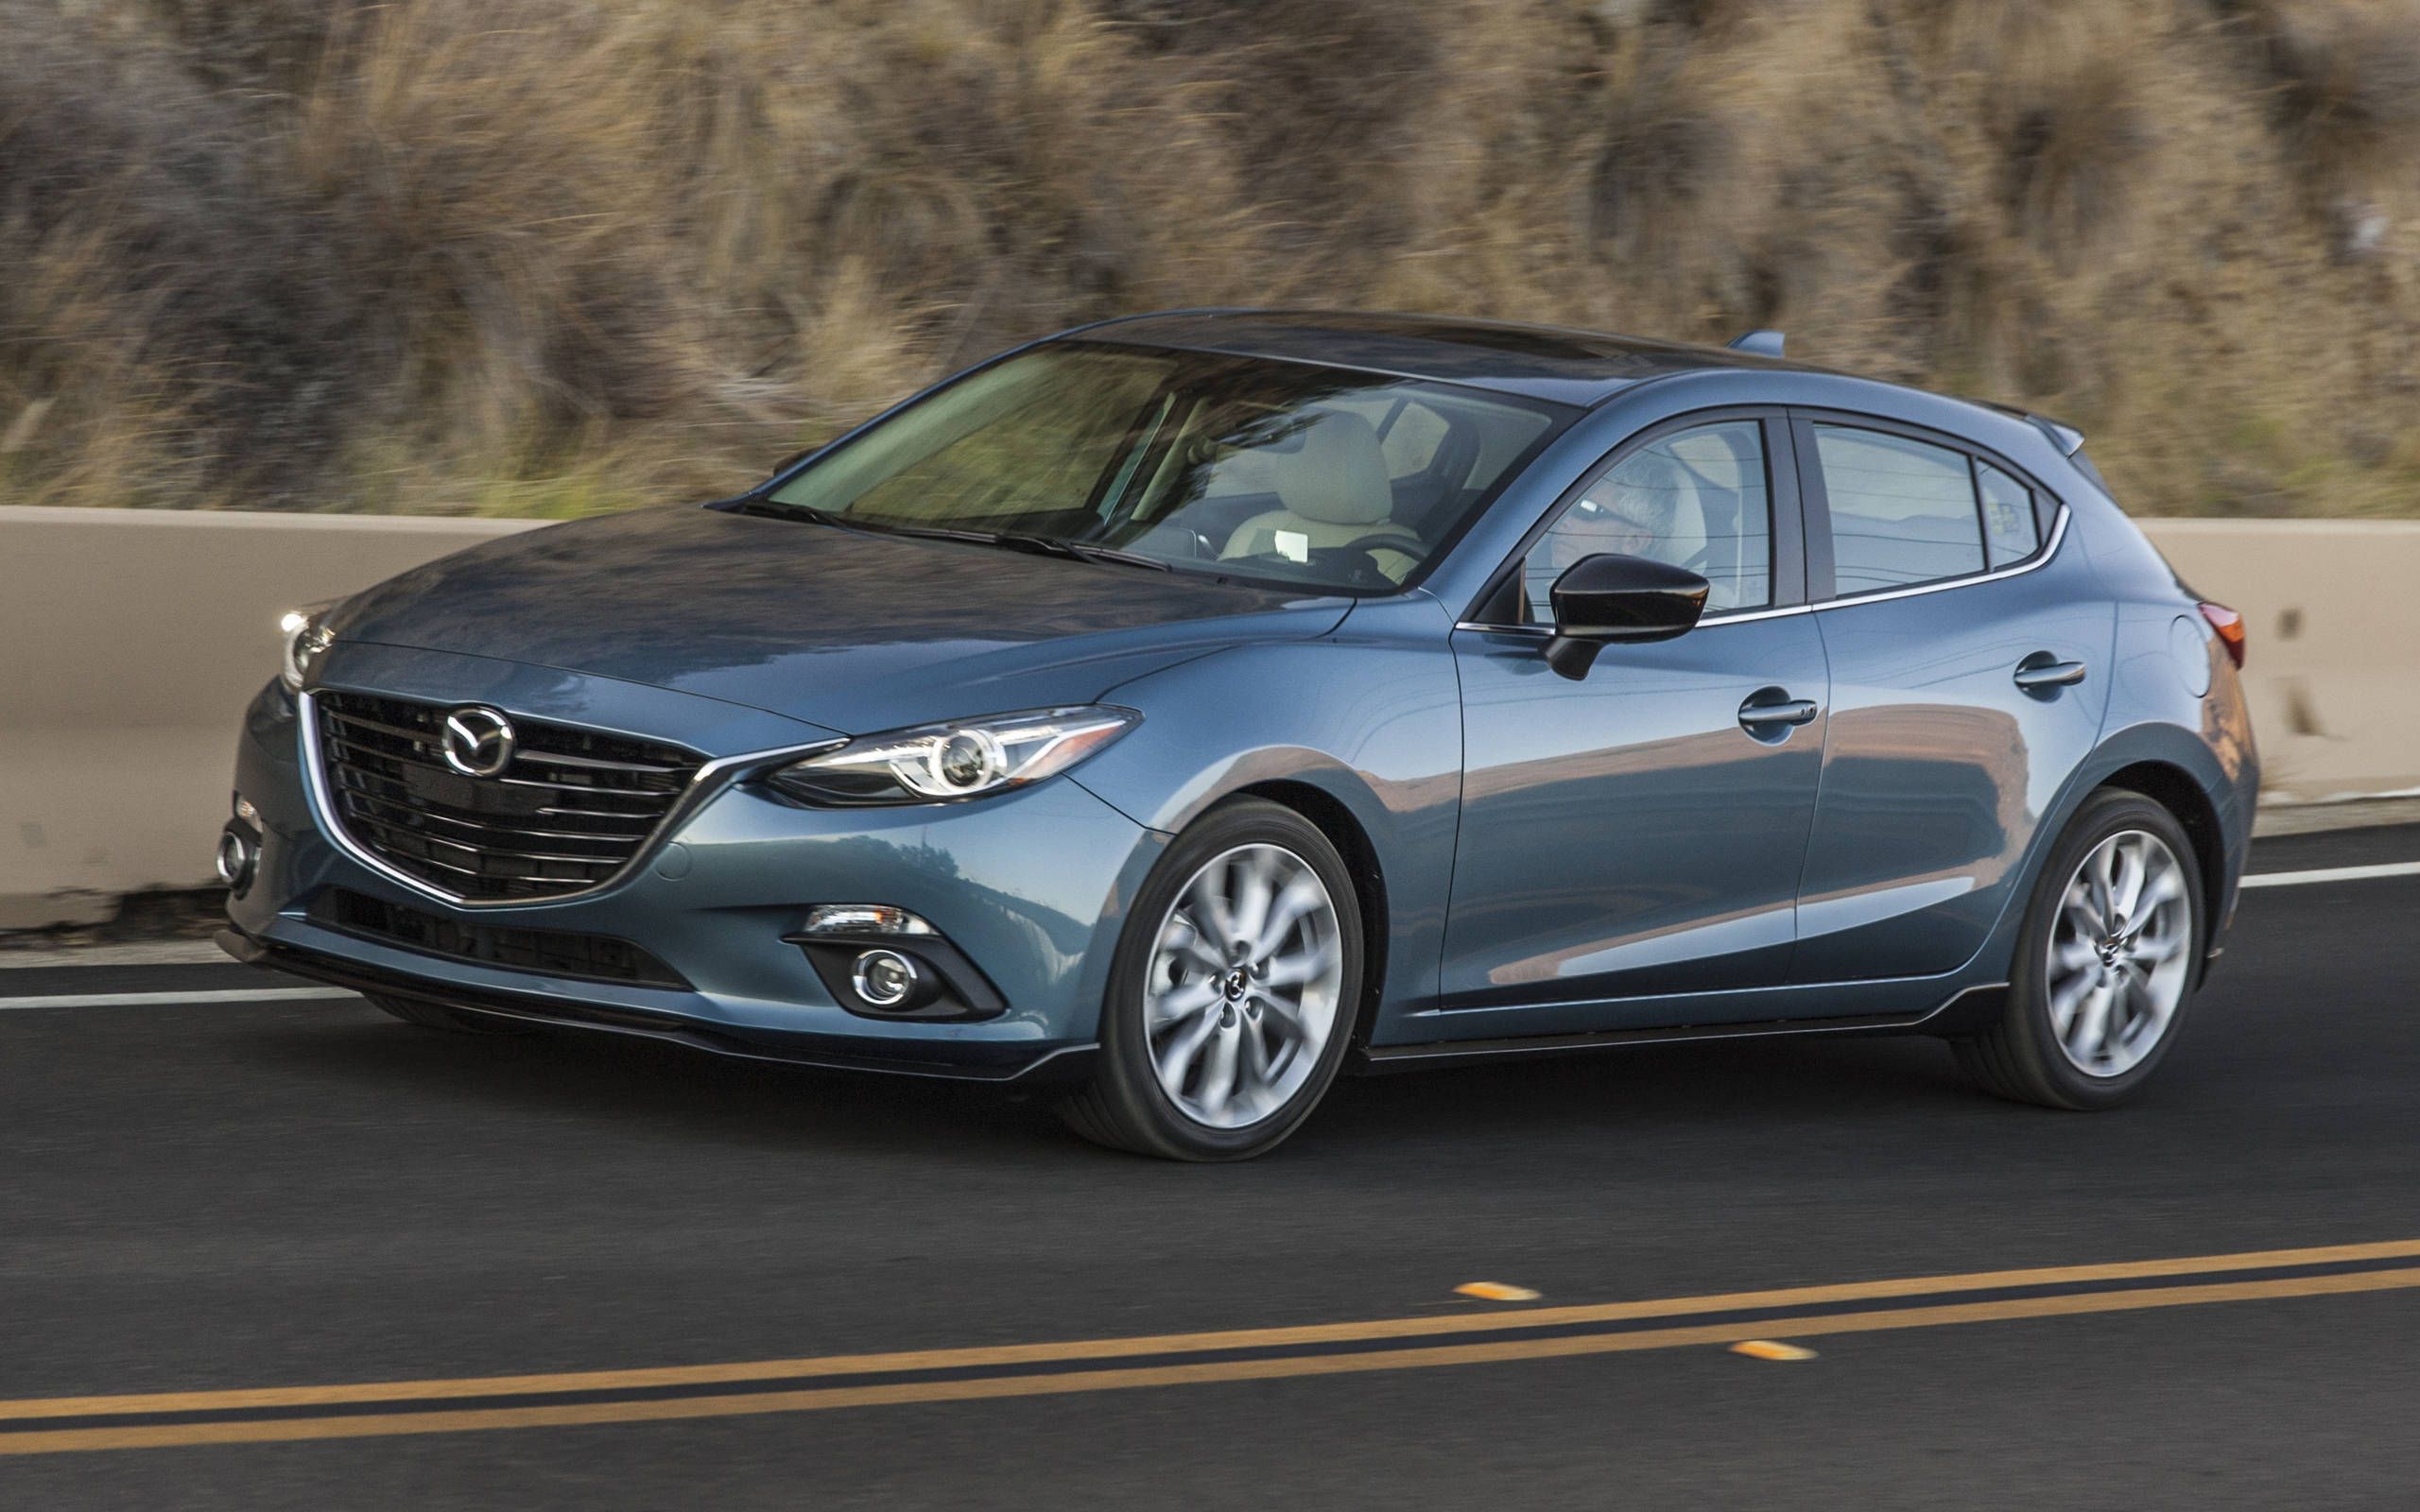 2015 Mazda 3 s Grand Touring 5-Door review notes